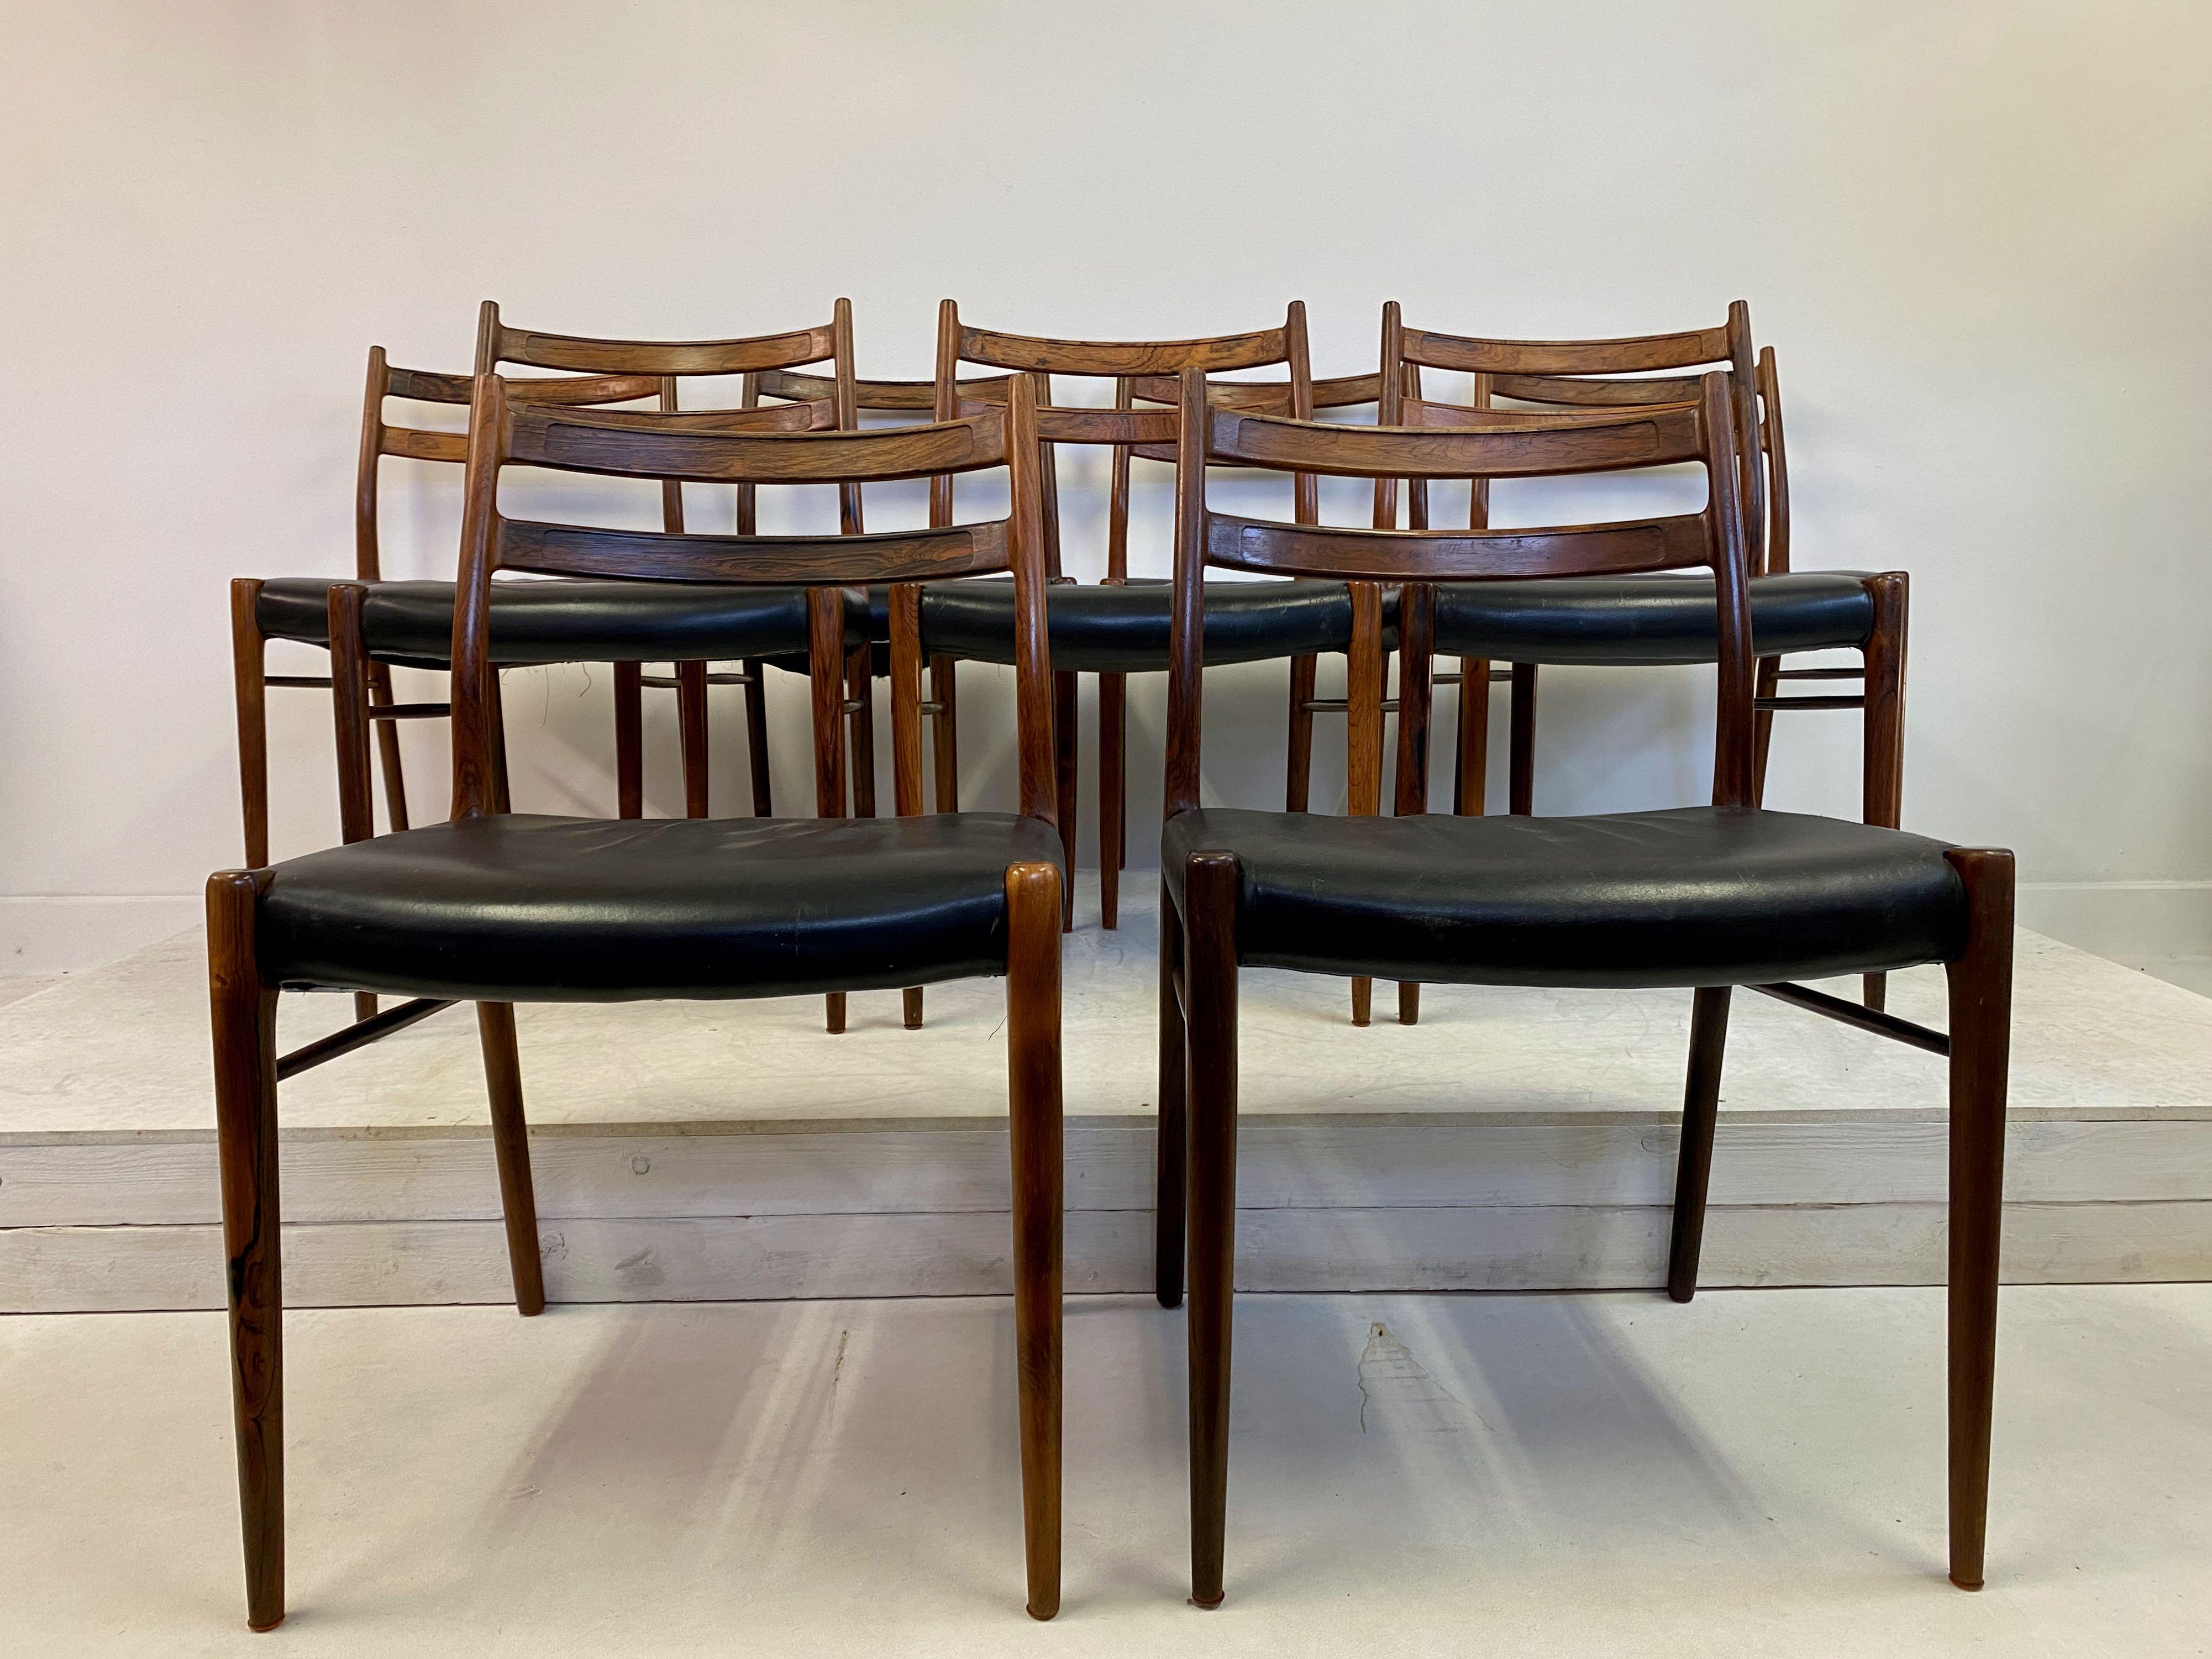 Set of nine dining chairs

Model GS71 by Glyngøre Stolefabrik

Brazilian rosewood frames

Black leather seats

Some wear to the leather, can be reupholstered if desired.

Presented at the Scandinavian Furniture Fair at the Bella Centre